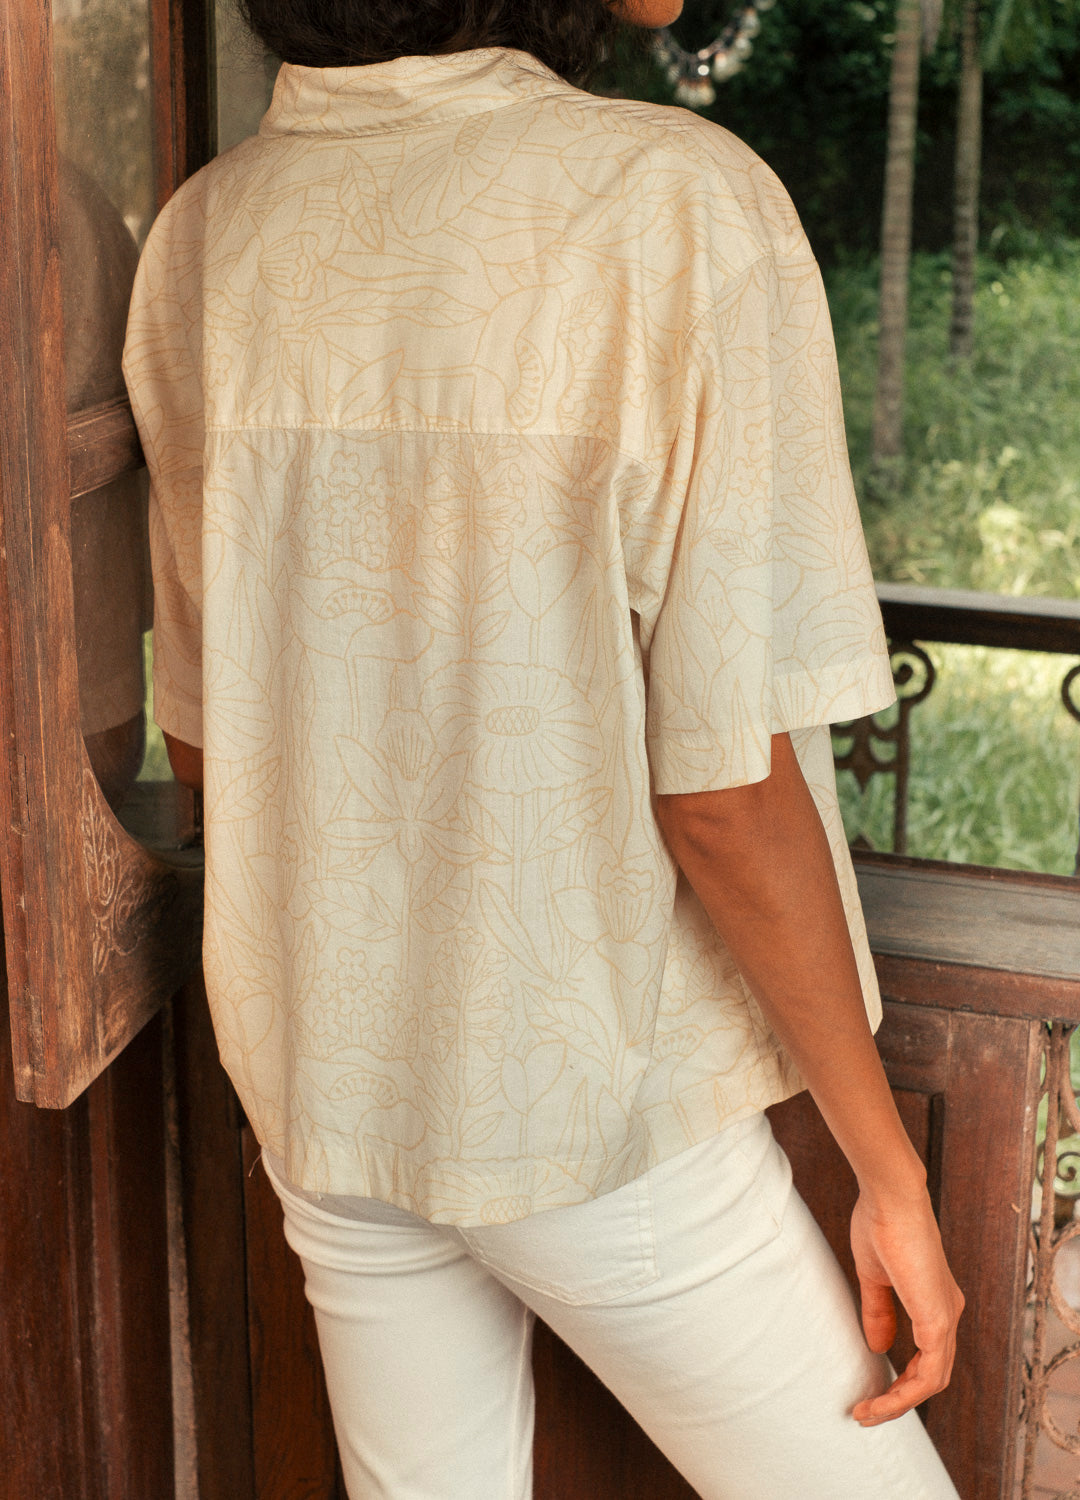 Botanical Shirt - Sustainable Clothes for Women - No Nasties